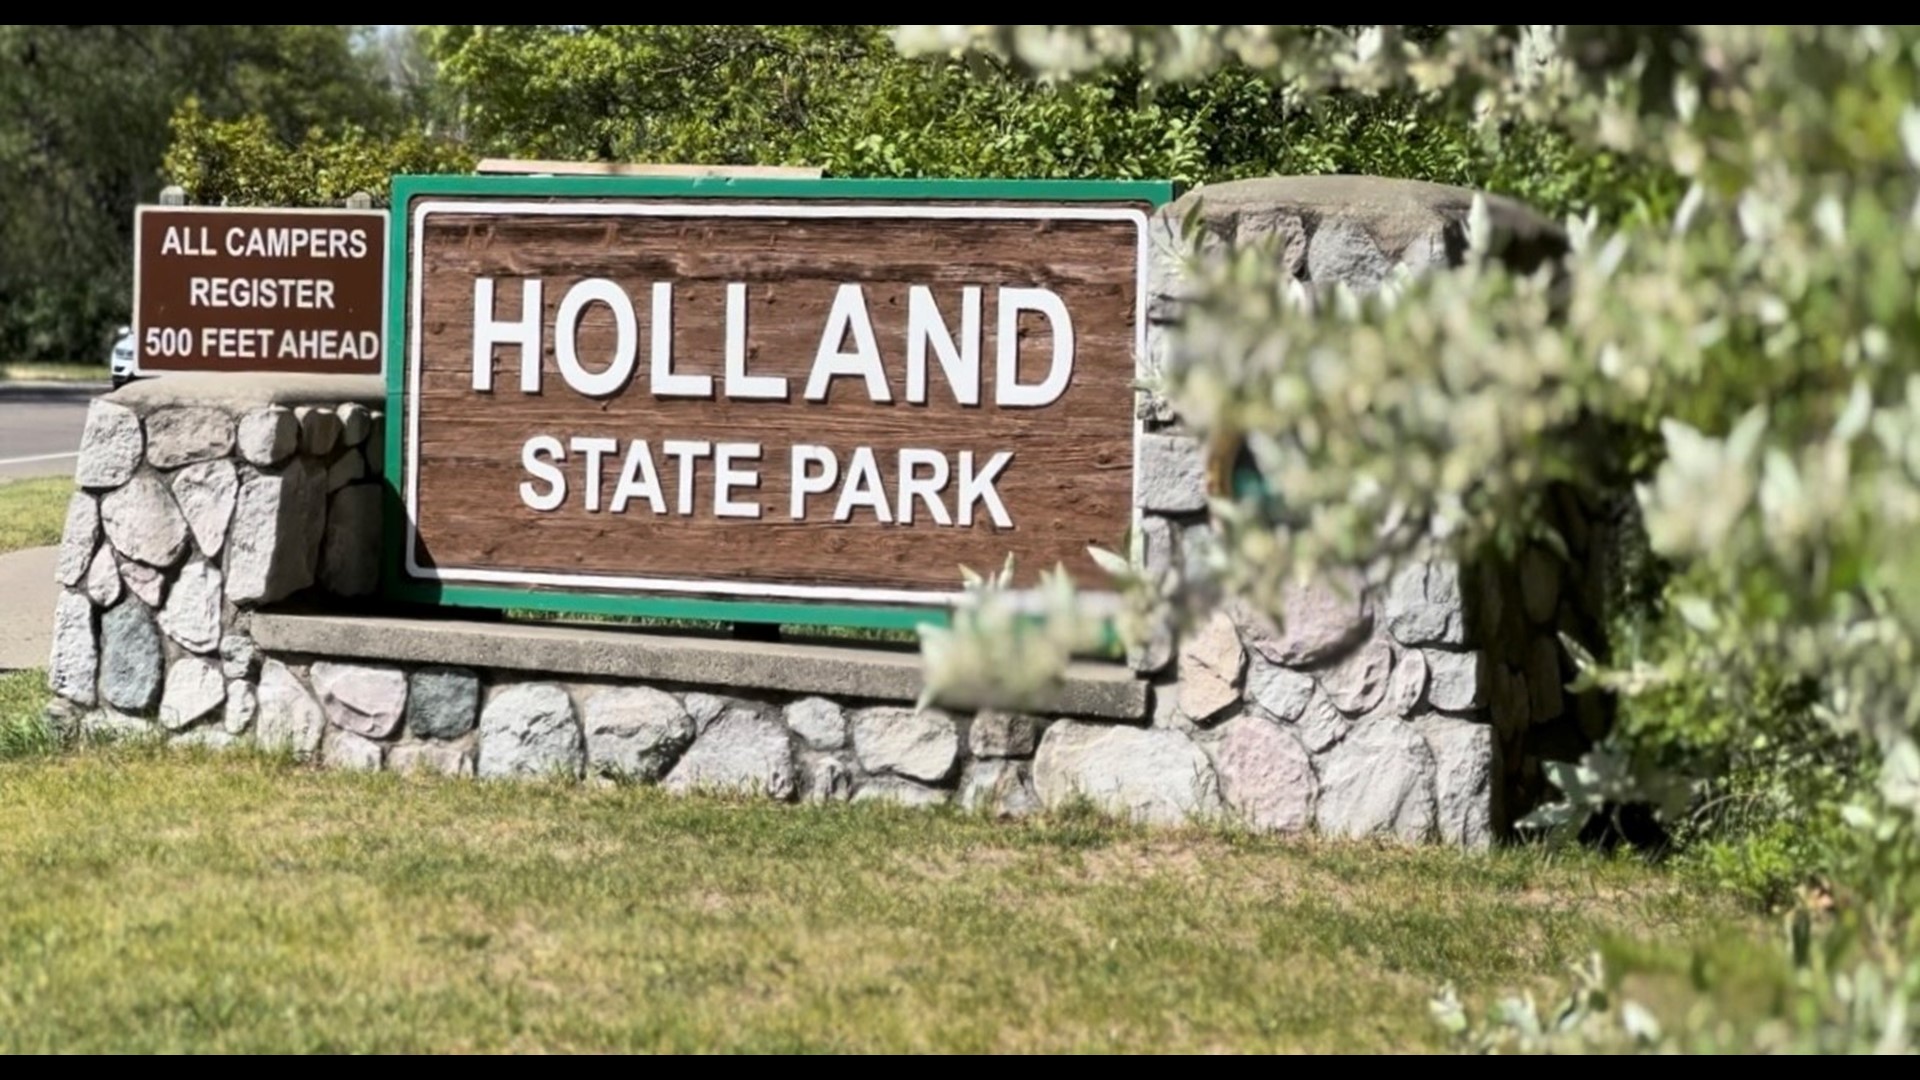 In just one more day Holland State Park will be welcoming nearly two thousand campers for the holiday weekend.